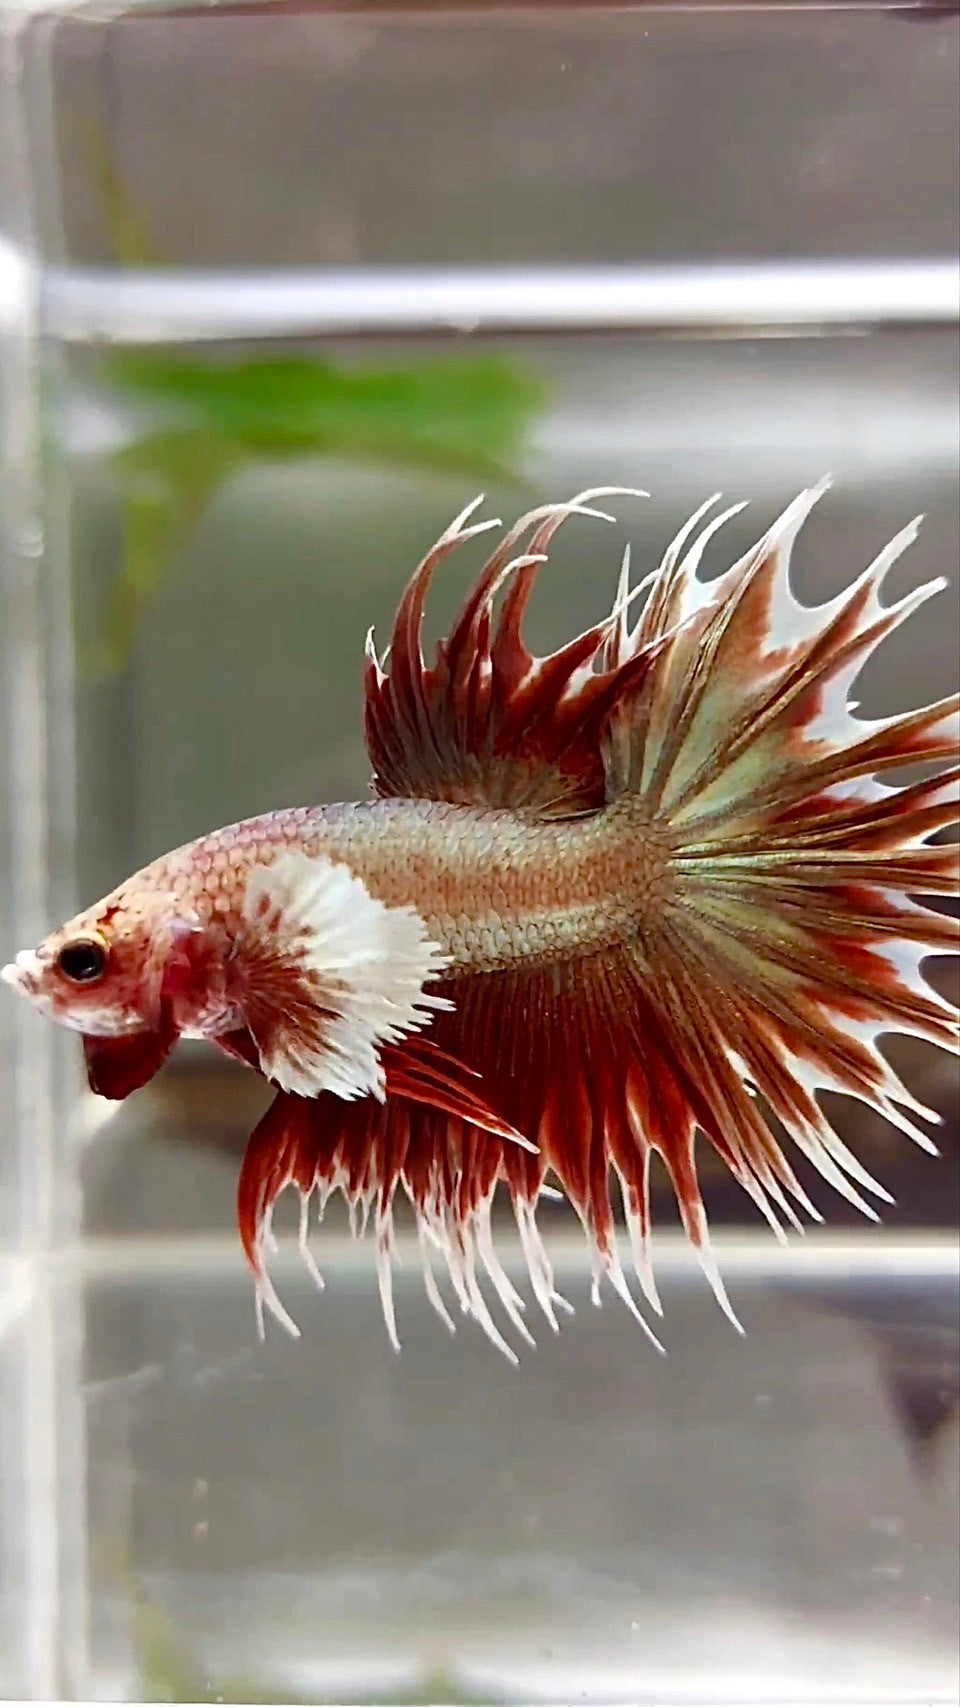 CROWNTAIL DUMBO EAR ROSEGOLD SUPER BETTA FISH